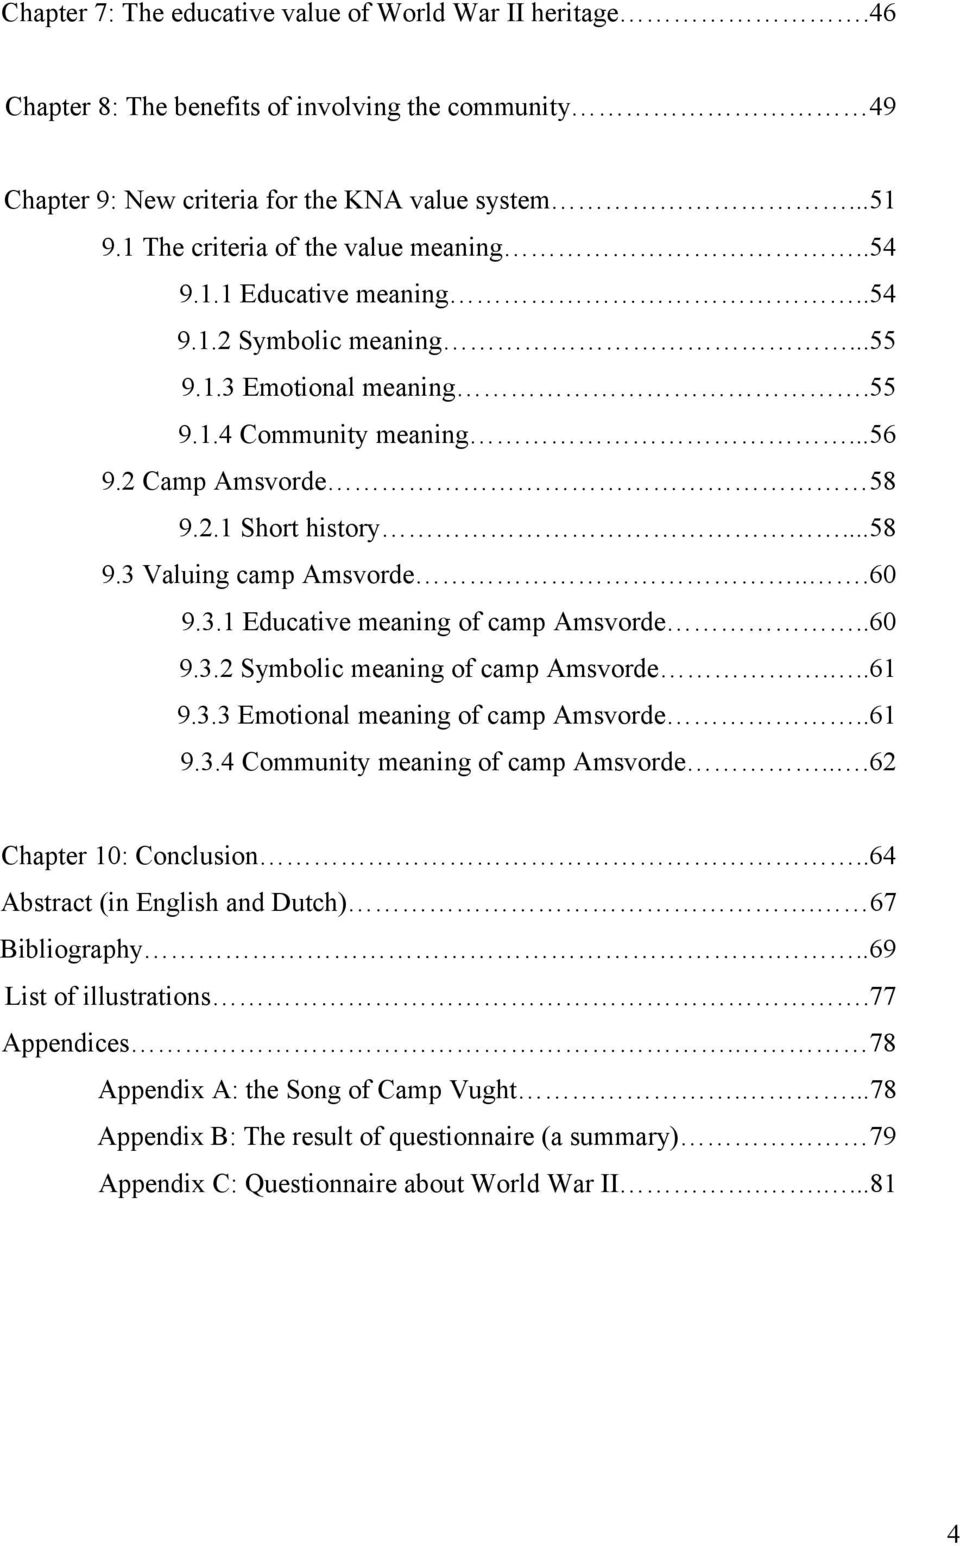 ..60 9.3.1 Educative meaning of camp Amsvorde..60 9.3.2 Symbolic meaning of camp Amsvorde...61 9.3.3 Emotional meaning of camp Amsvorde..61 9.3.4 Community meaning of camp Amsvorde.